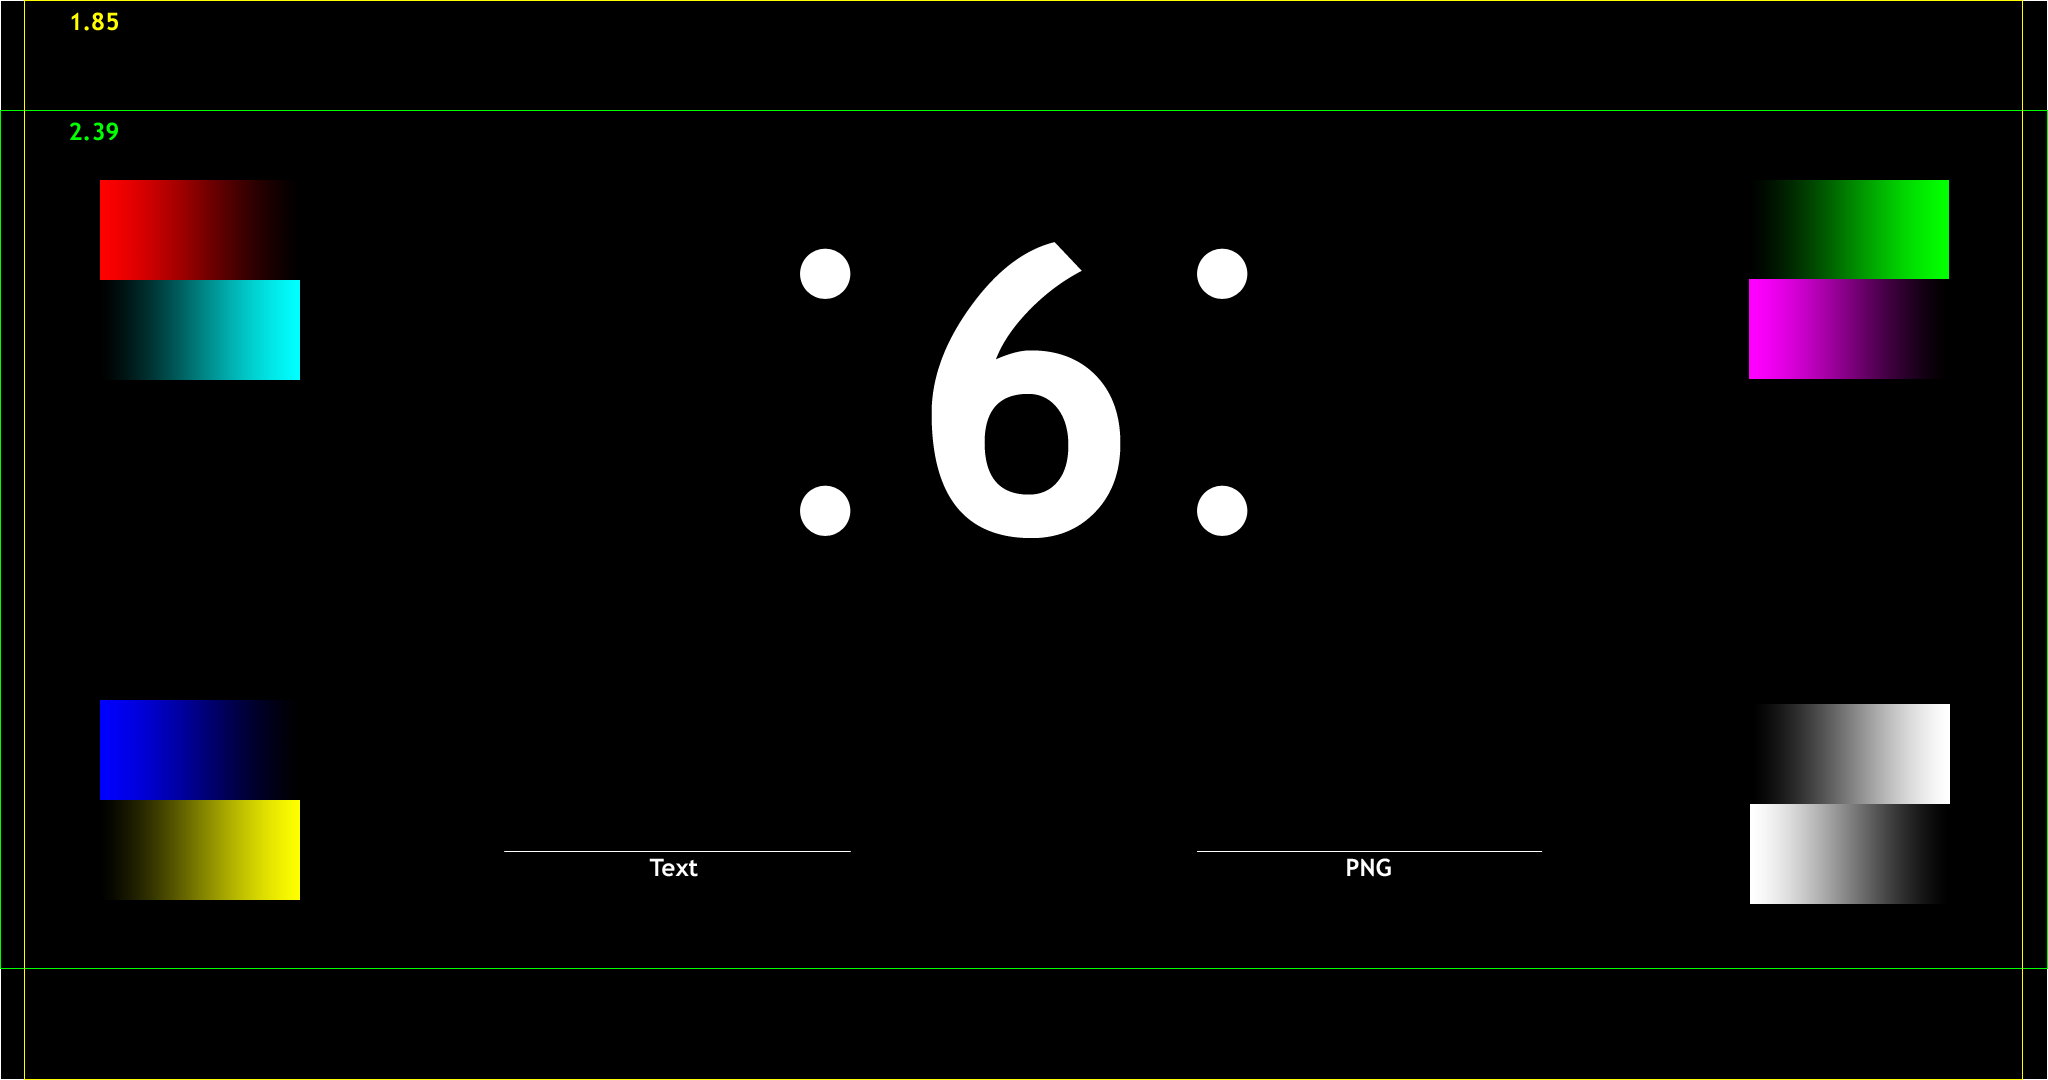 Test pattern for the first frame of the fourth count period, which displays the number 6